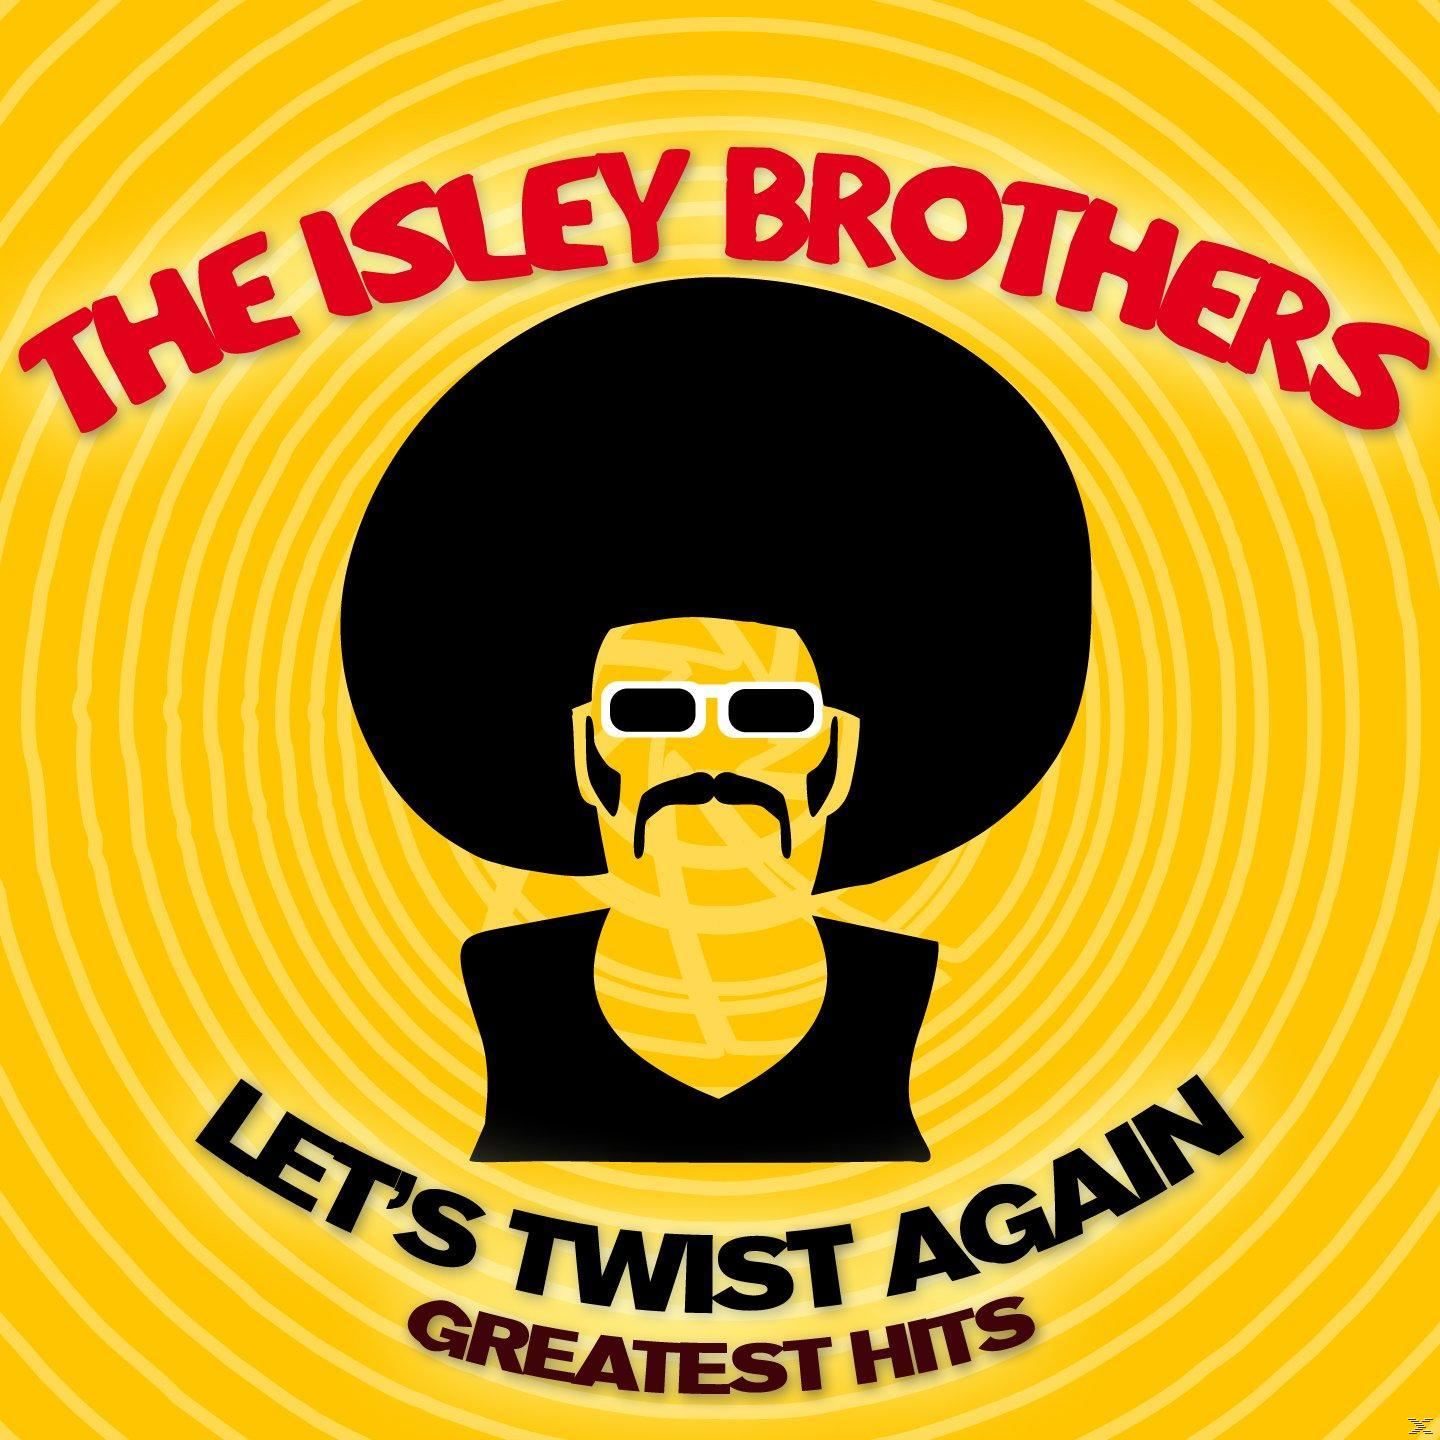 Hits Again-Greatest Let\'s (CD) Brothers - Twist - Isley The